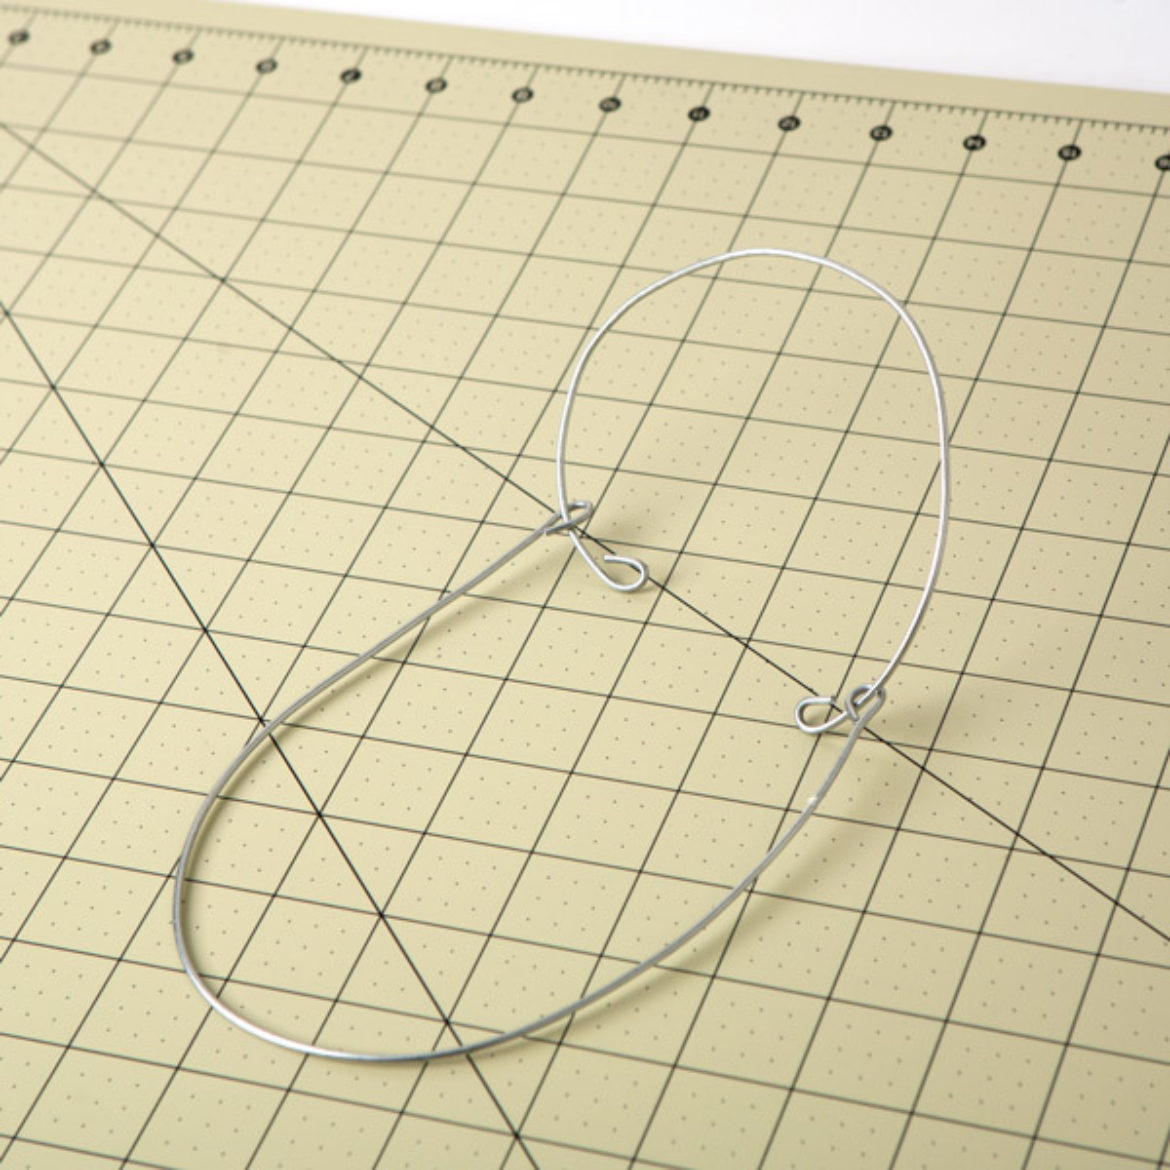 circular piece threaded through the looped ends of the U shaped piece